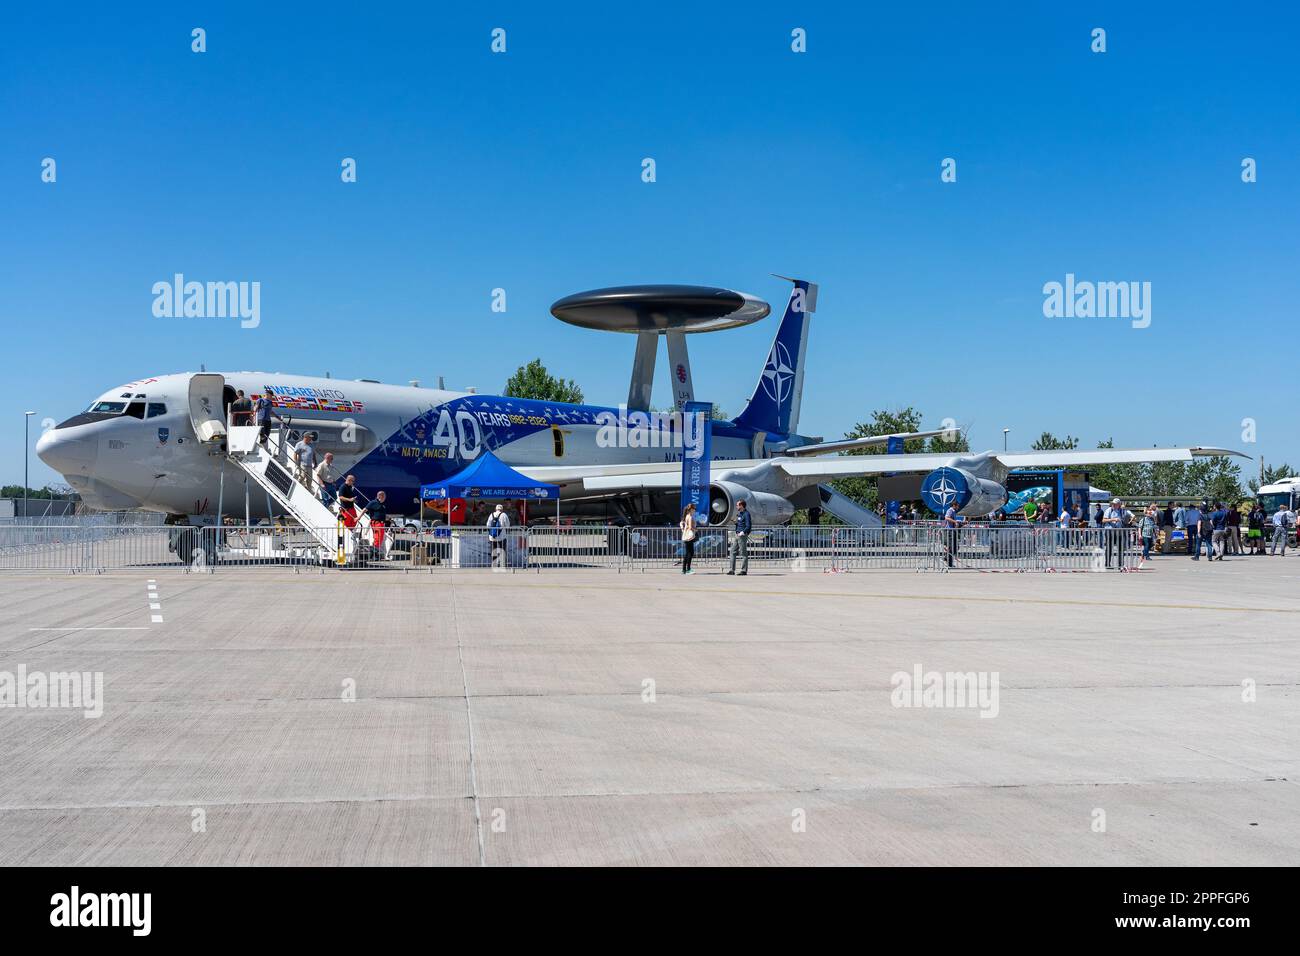 BERLIN, GERMANY - JUNE 23, 2022: The military aircraft Boeing E-3A Sentry AWACS. Special Livery NATO 40 Years Anniversary Colors. Exhibition ILA Berlin Air Show 2022 Stock Photo